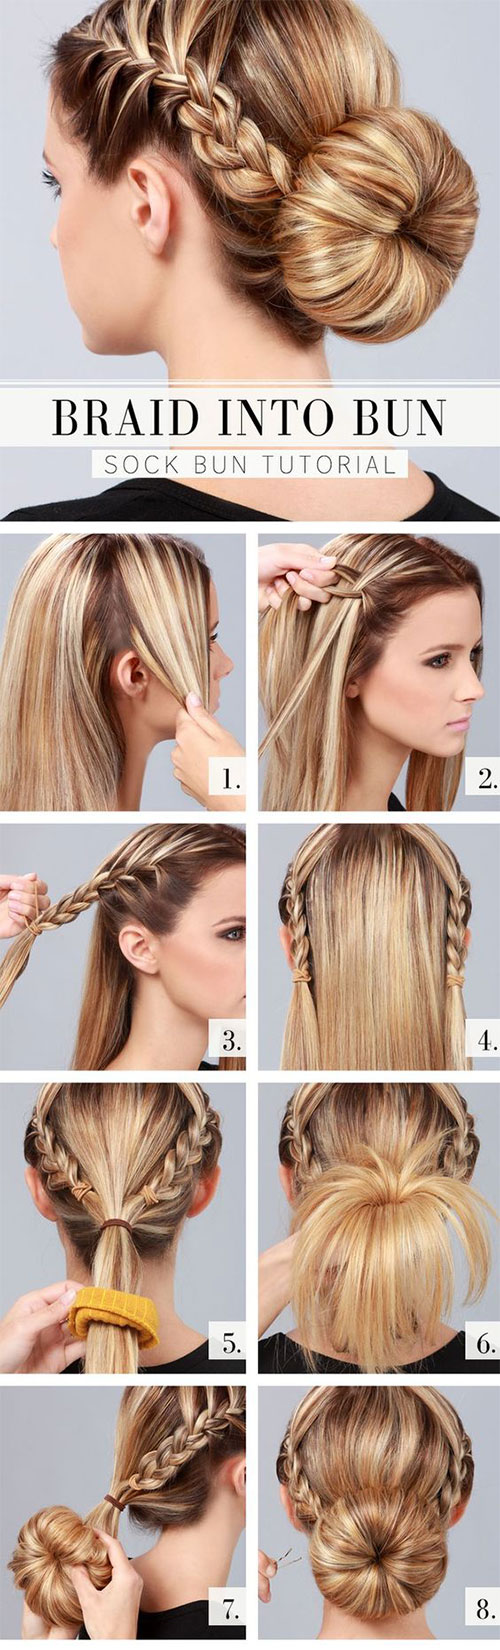 12 Easy Step By Step Summer Hairstyle Tutorials For Beginners 2017